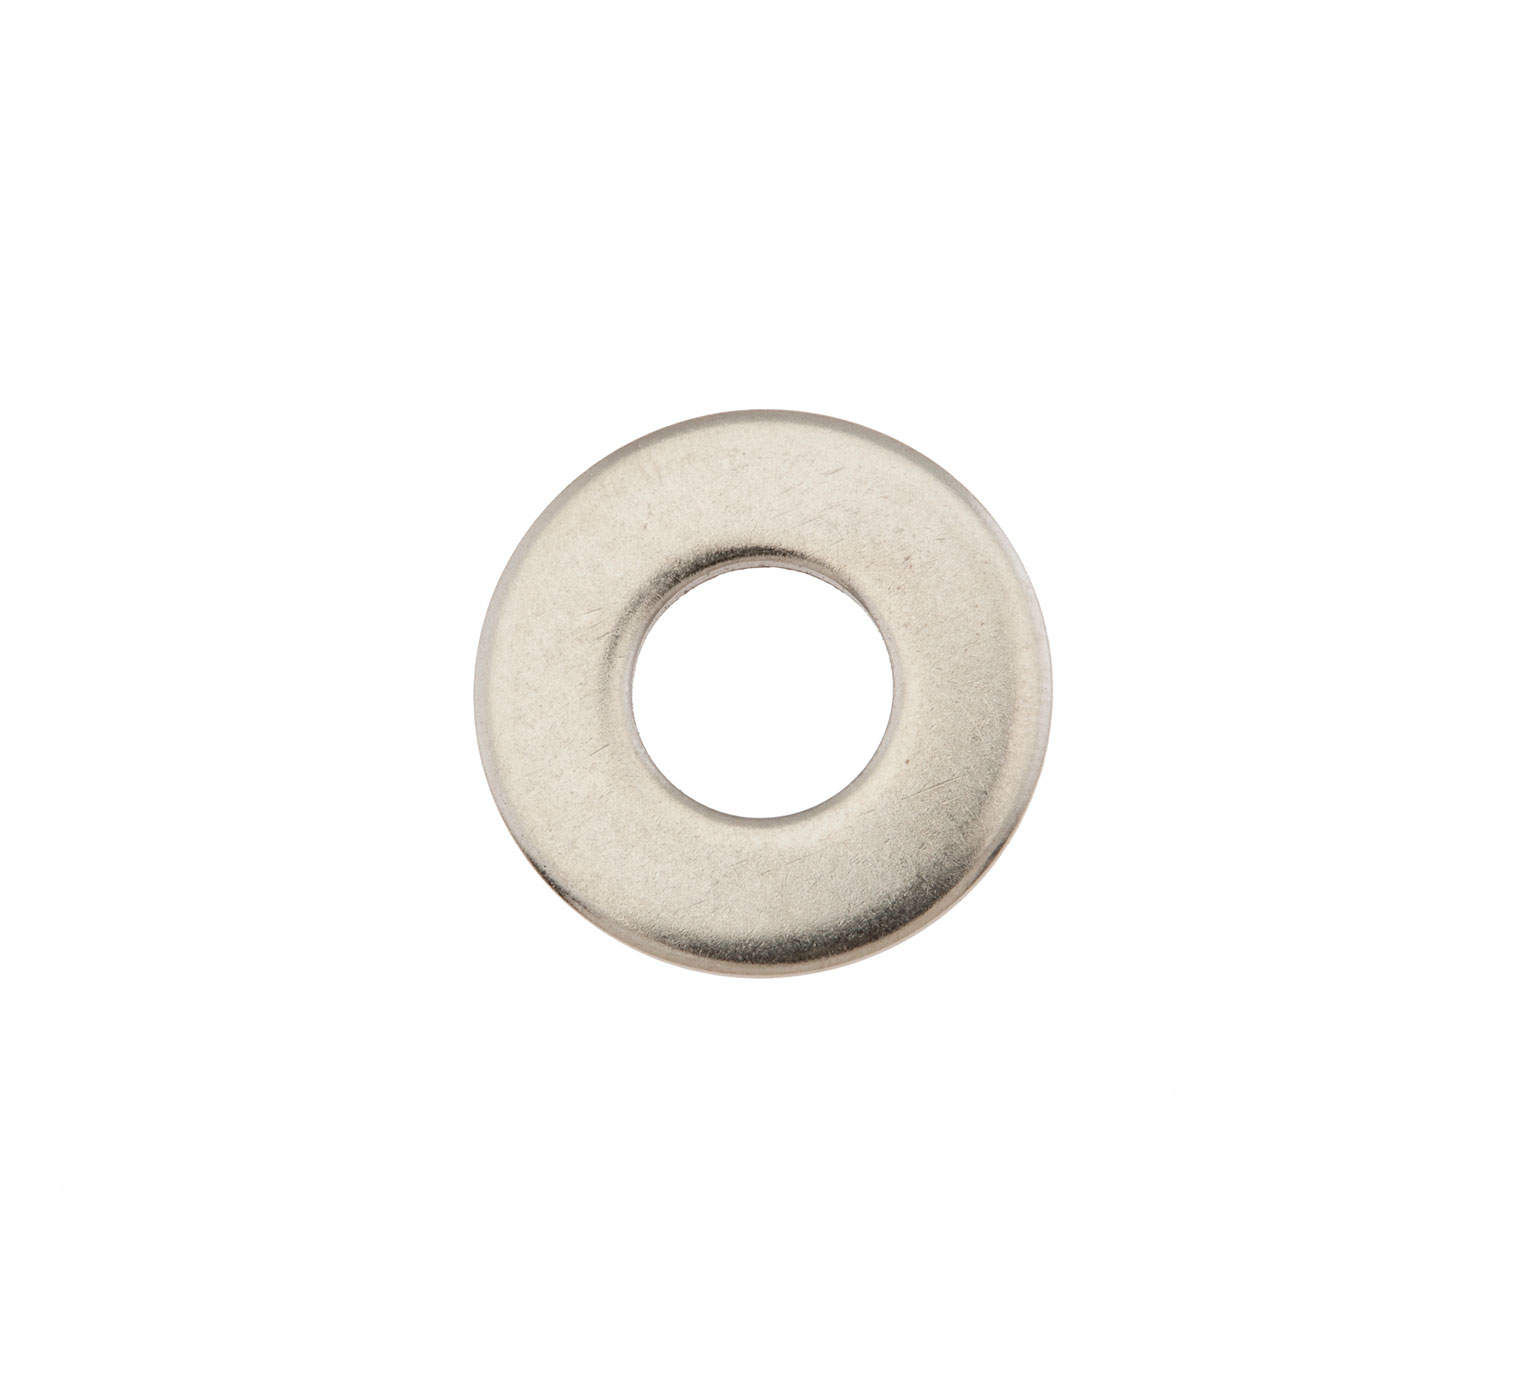 01686 Stainless Steel Washer - 0.438 ID x 1 OD x 0.83 in alt 1